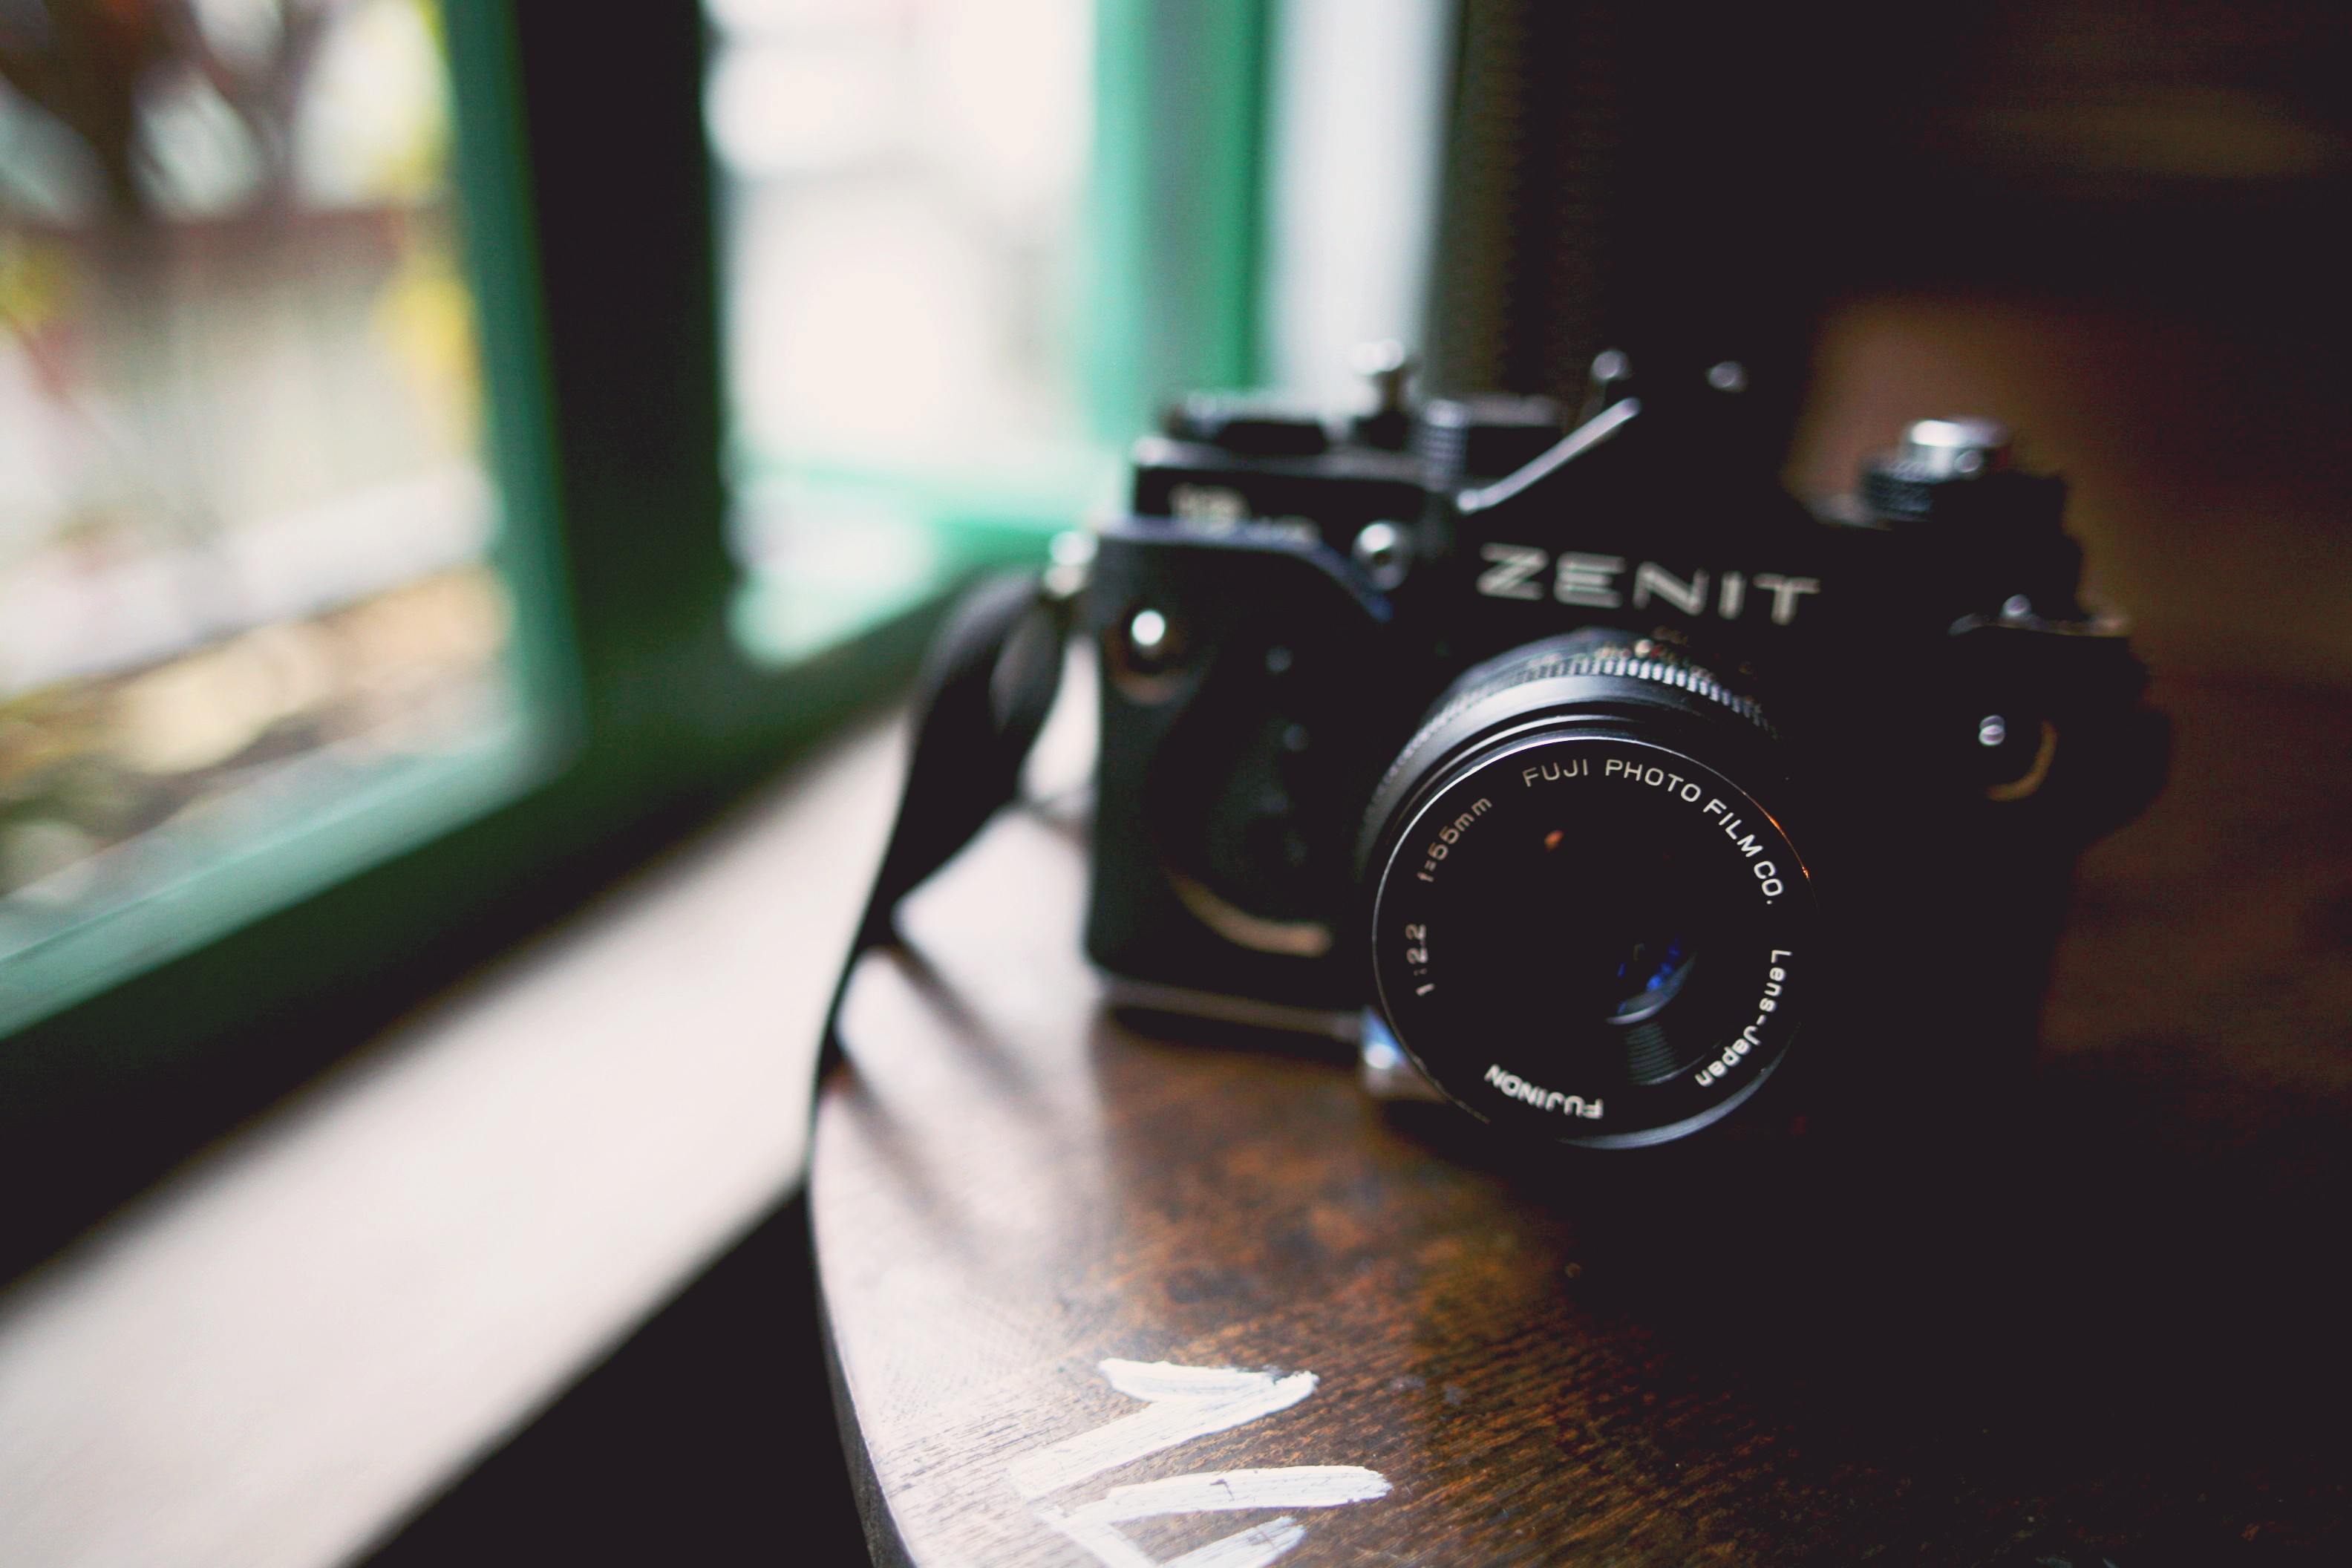 General 3168x2112 camera depth of field photography technology Zenit (camera) indoors